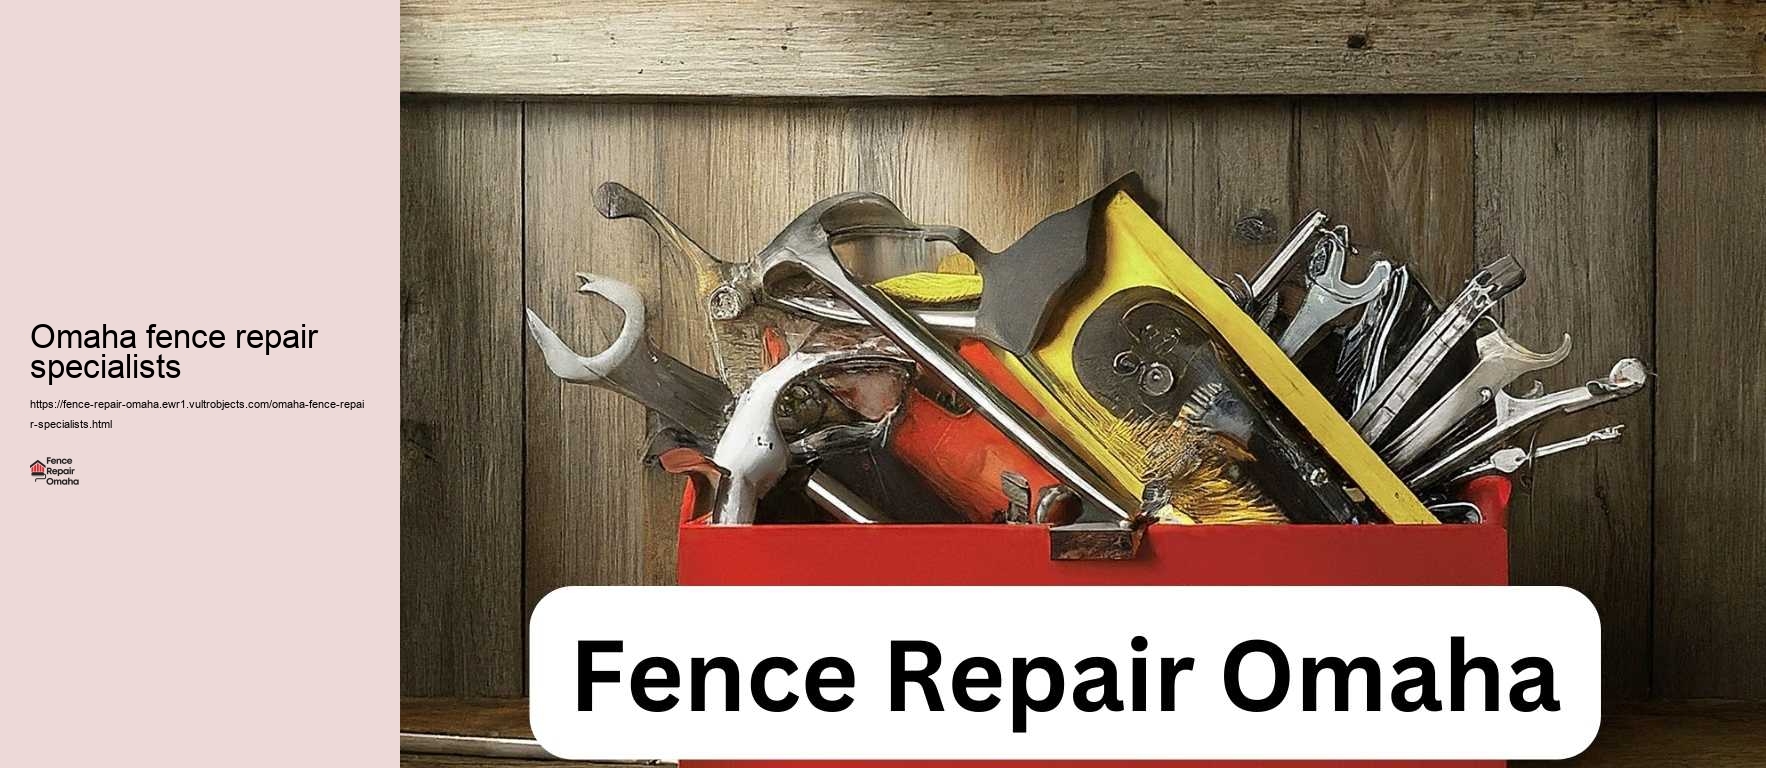 Omaha fence repair specialists